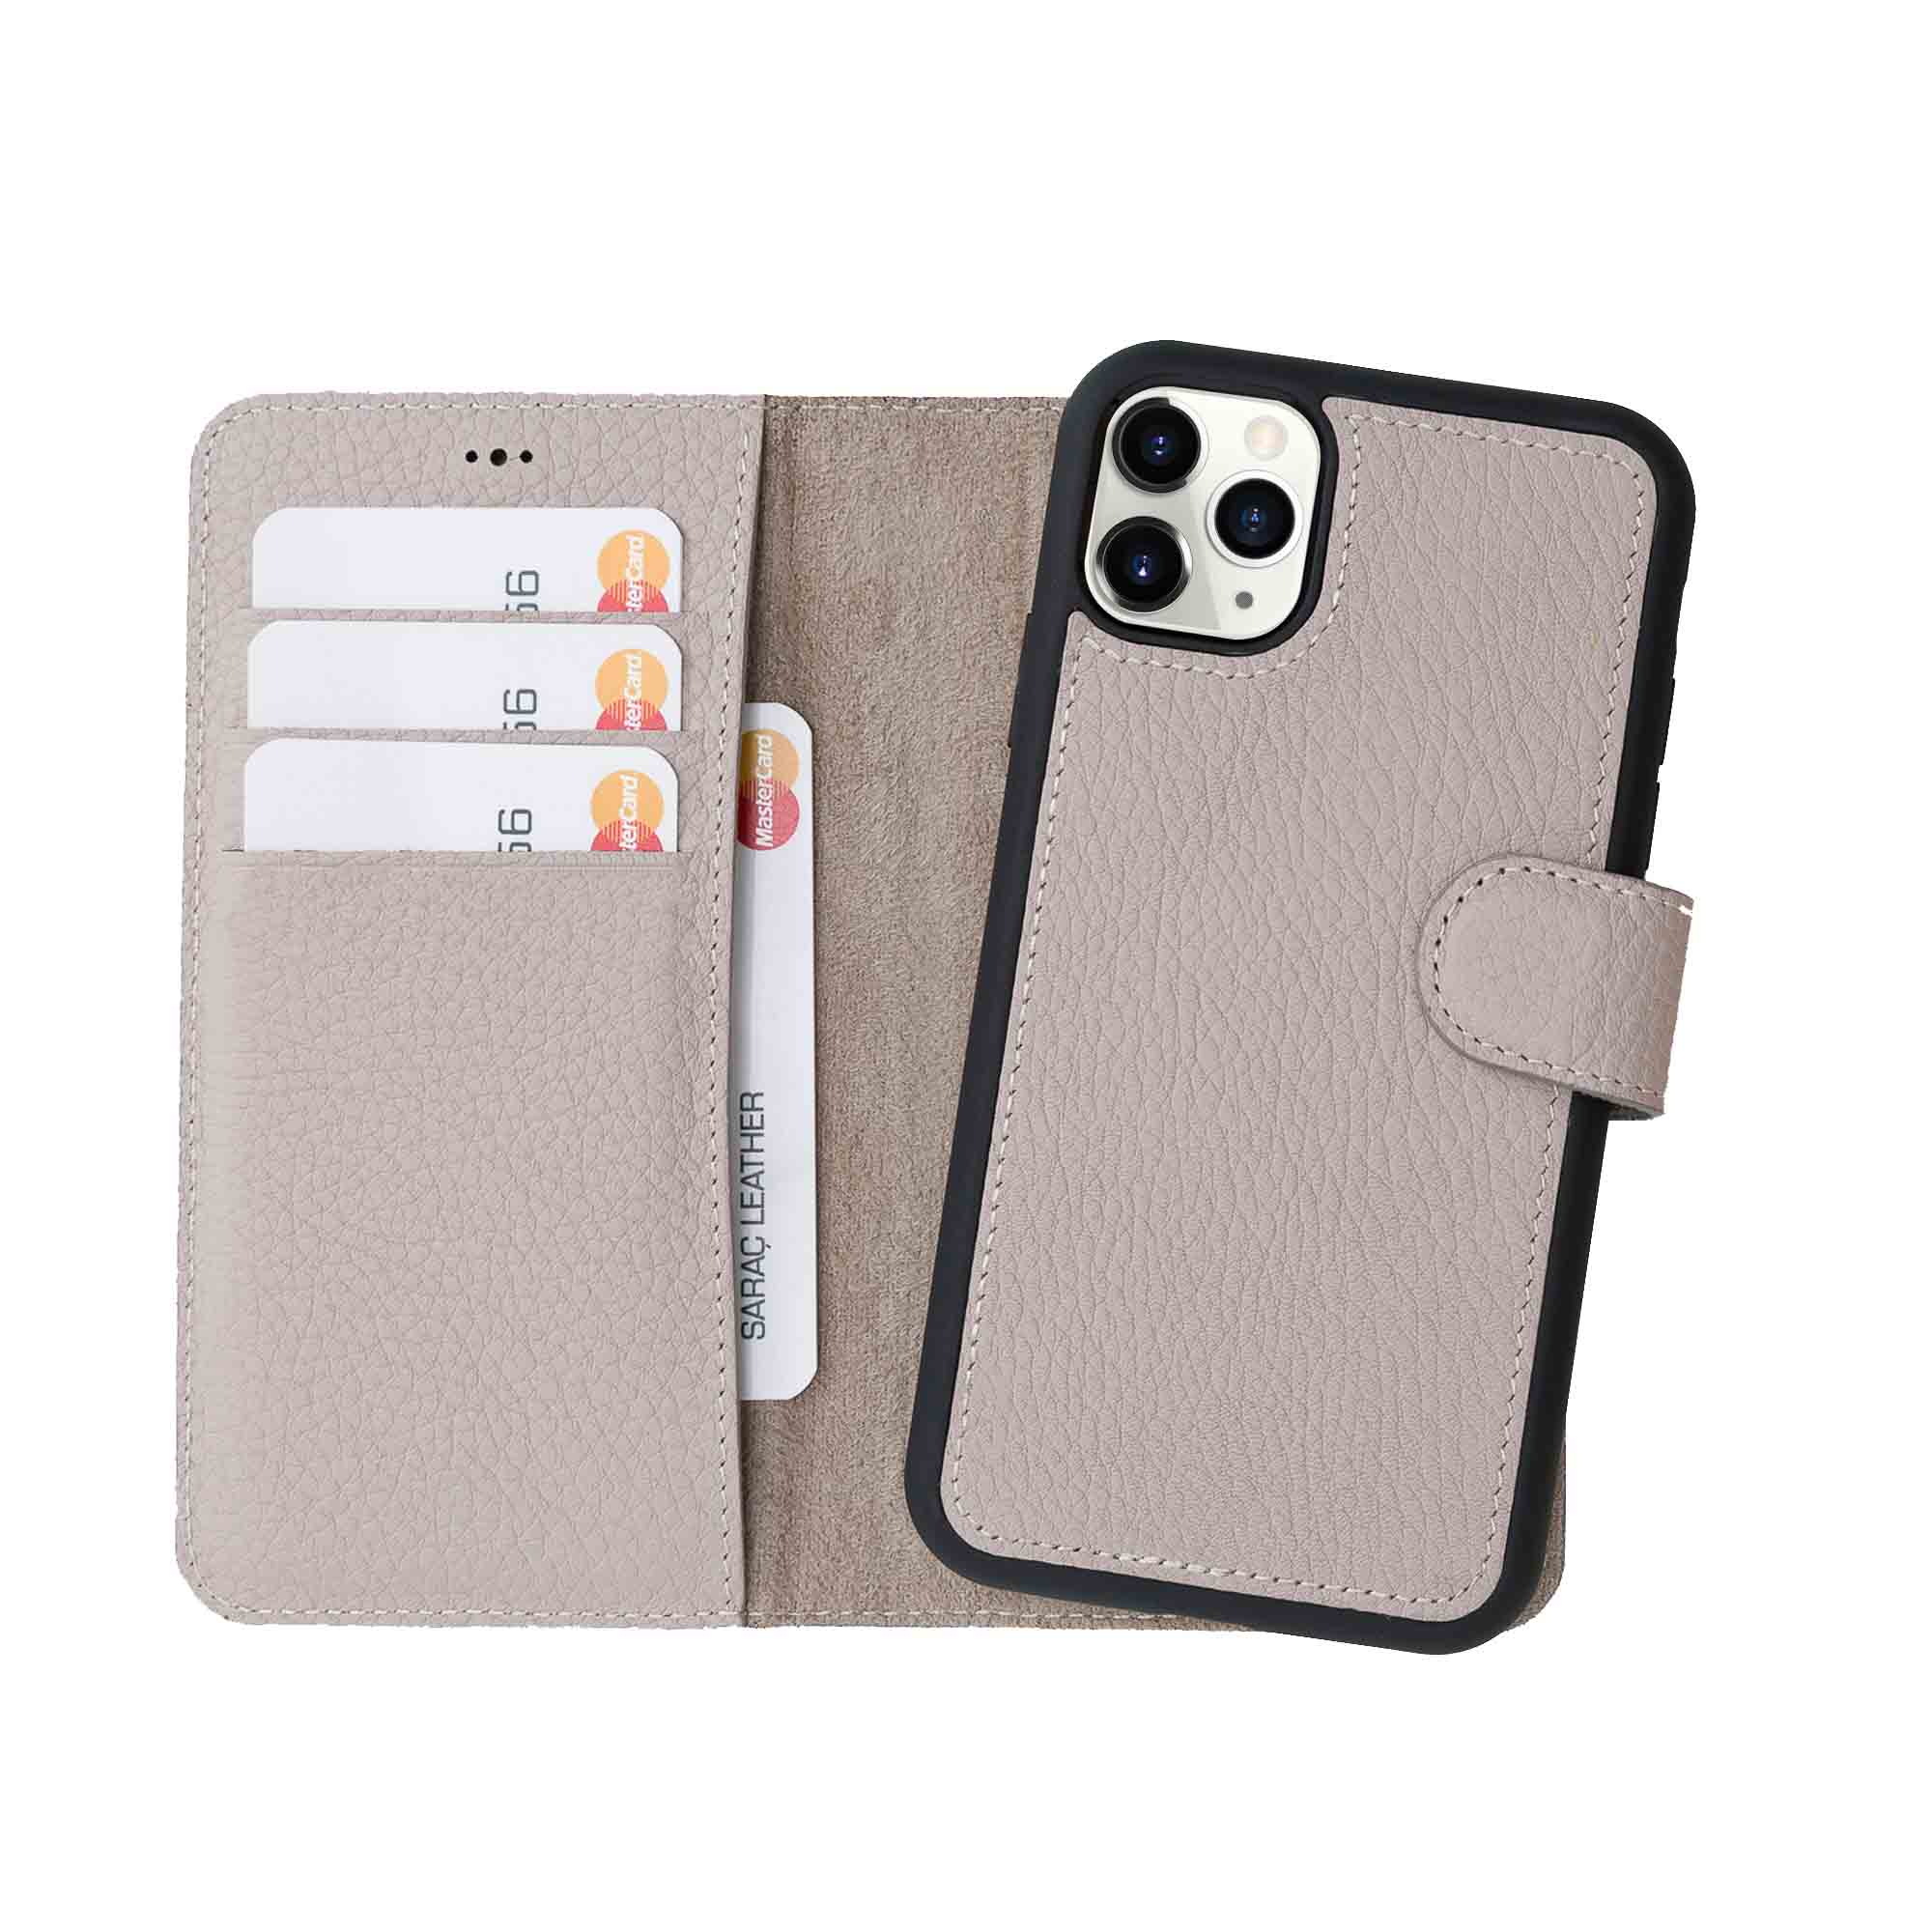 Magic Magnetic Detachable Leather Wallet Case for iPhone 11 Pro (5.8") - GRAY - saracleather